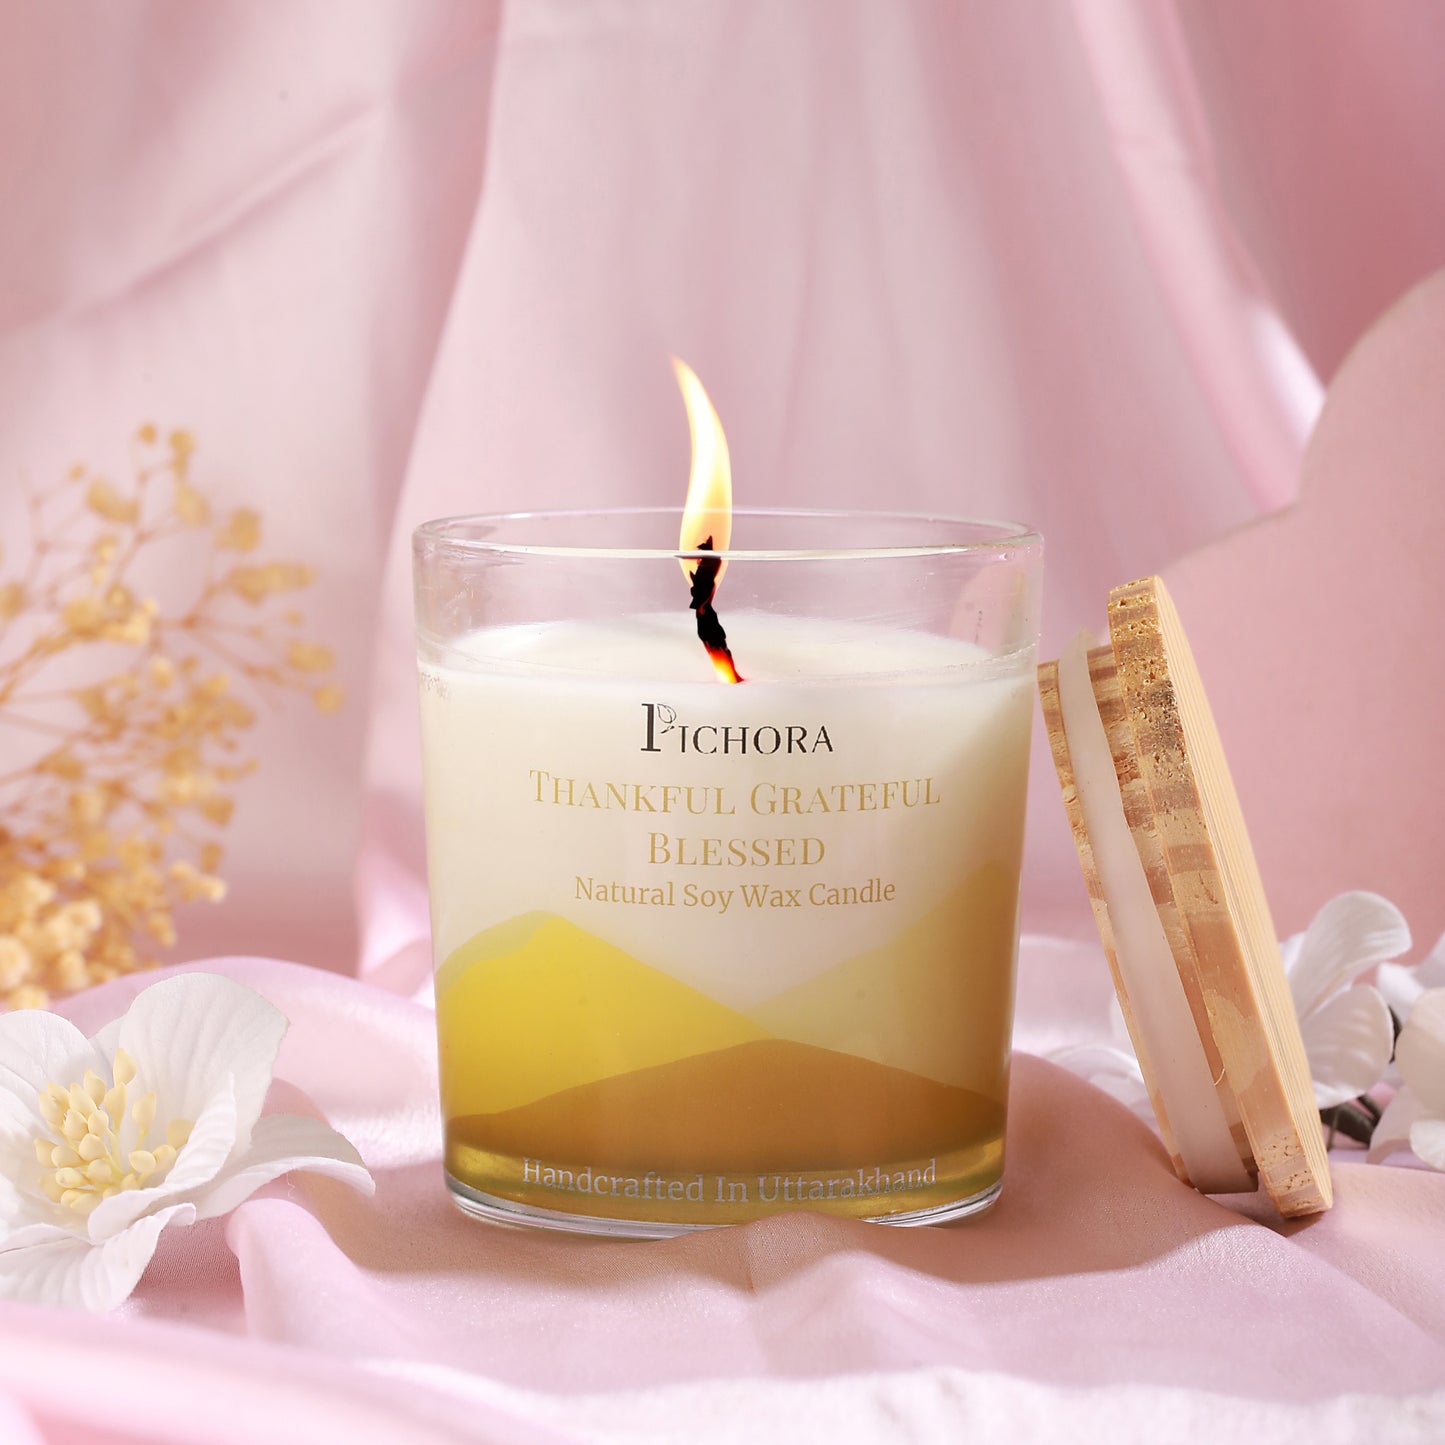 Thankful Grateful Blessed - Soy Wax Candle